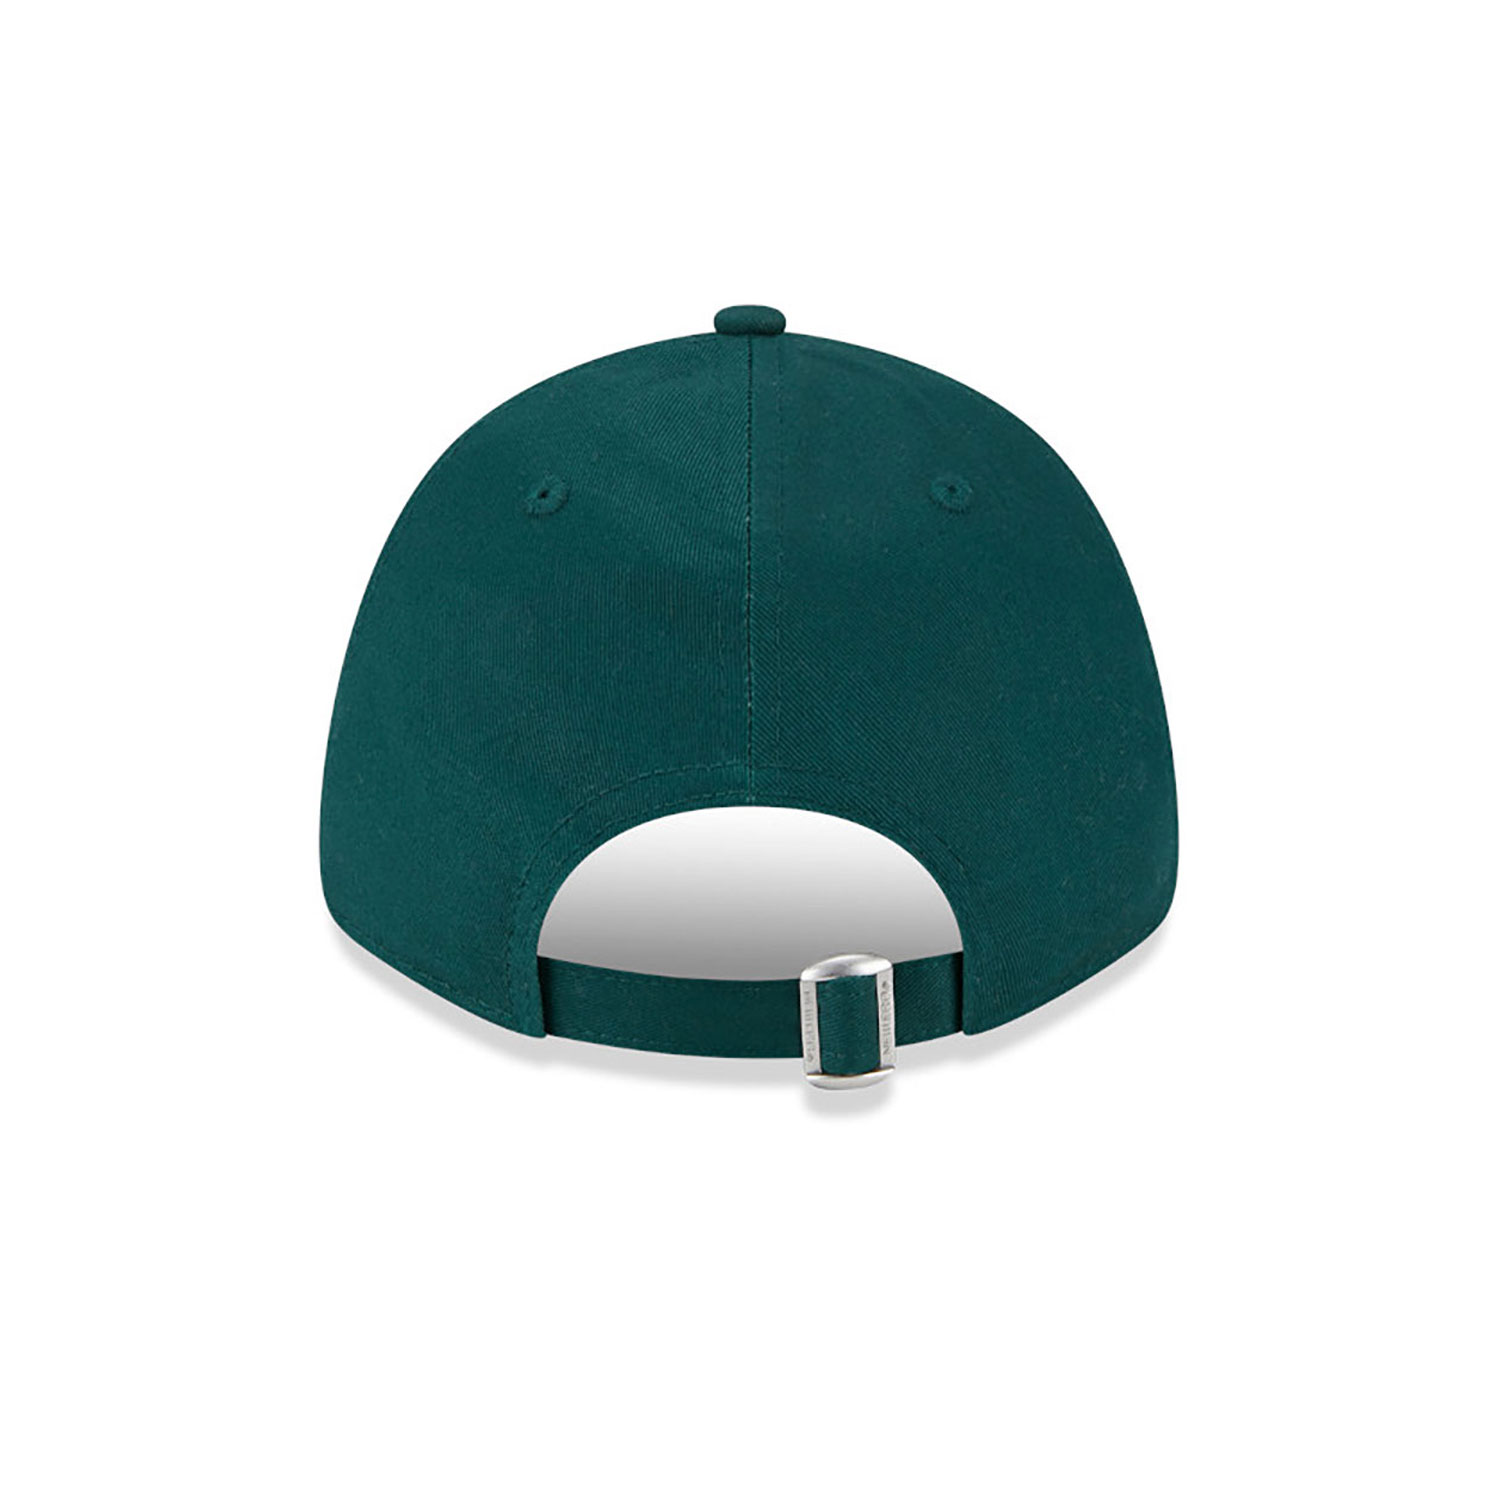 New York Yankees Check Infill Green 9FORTY Adjustable Cap